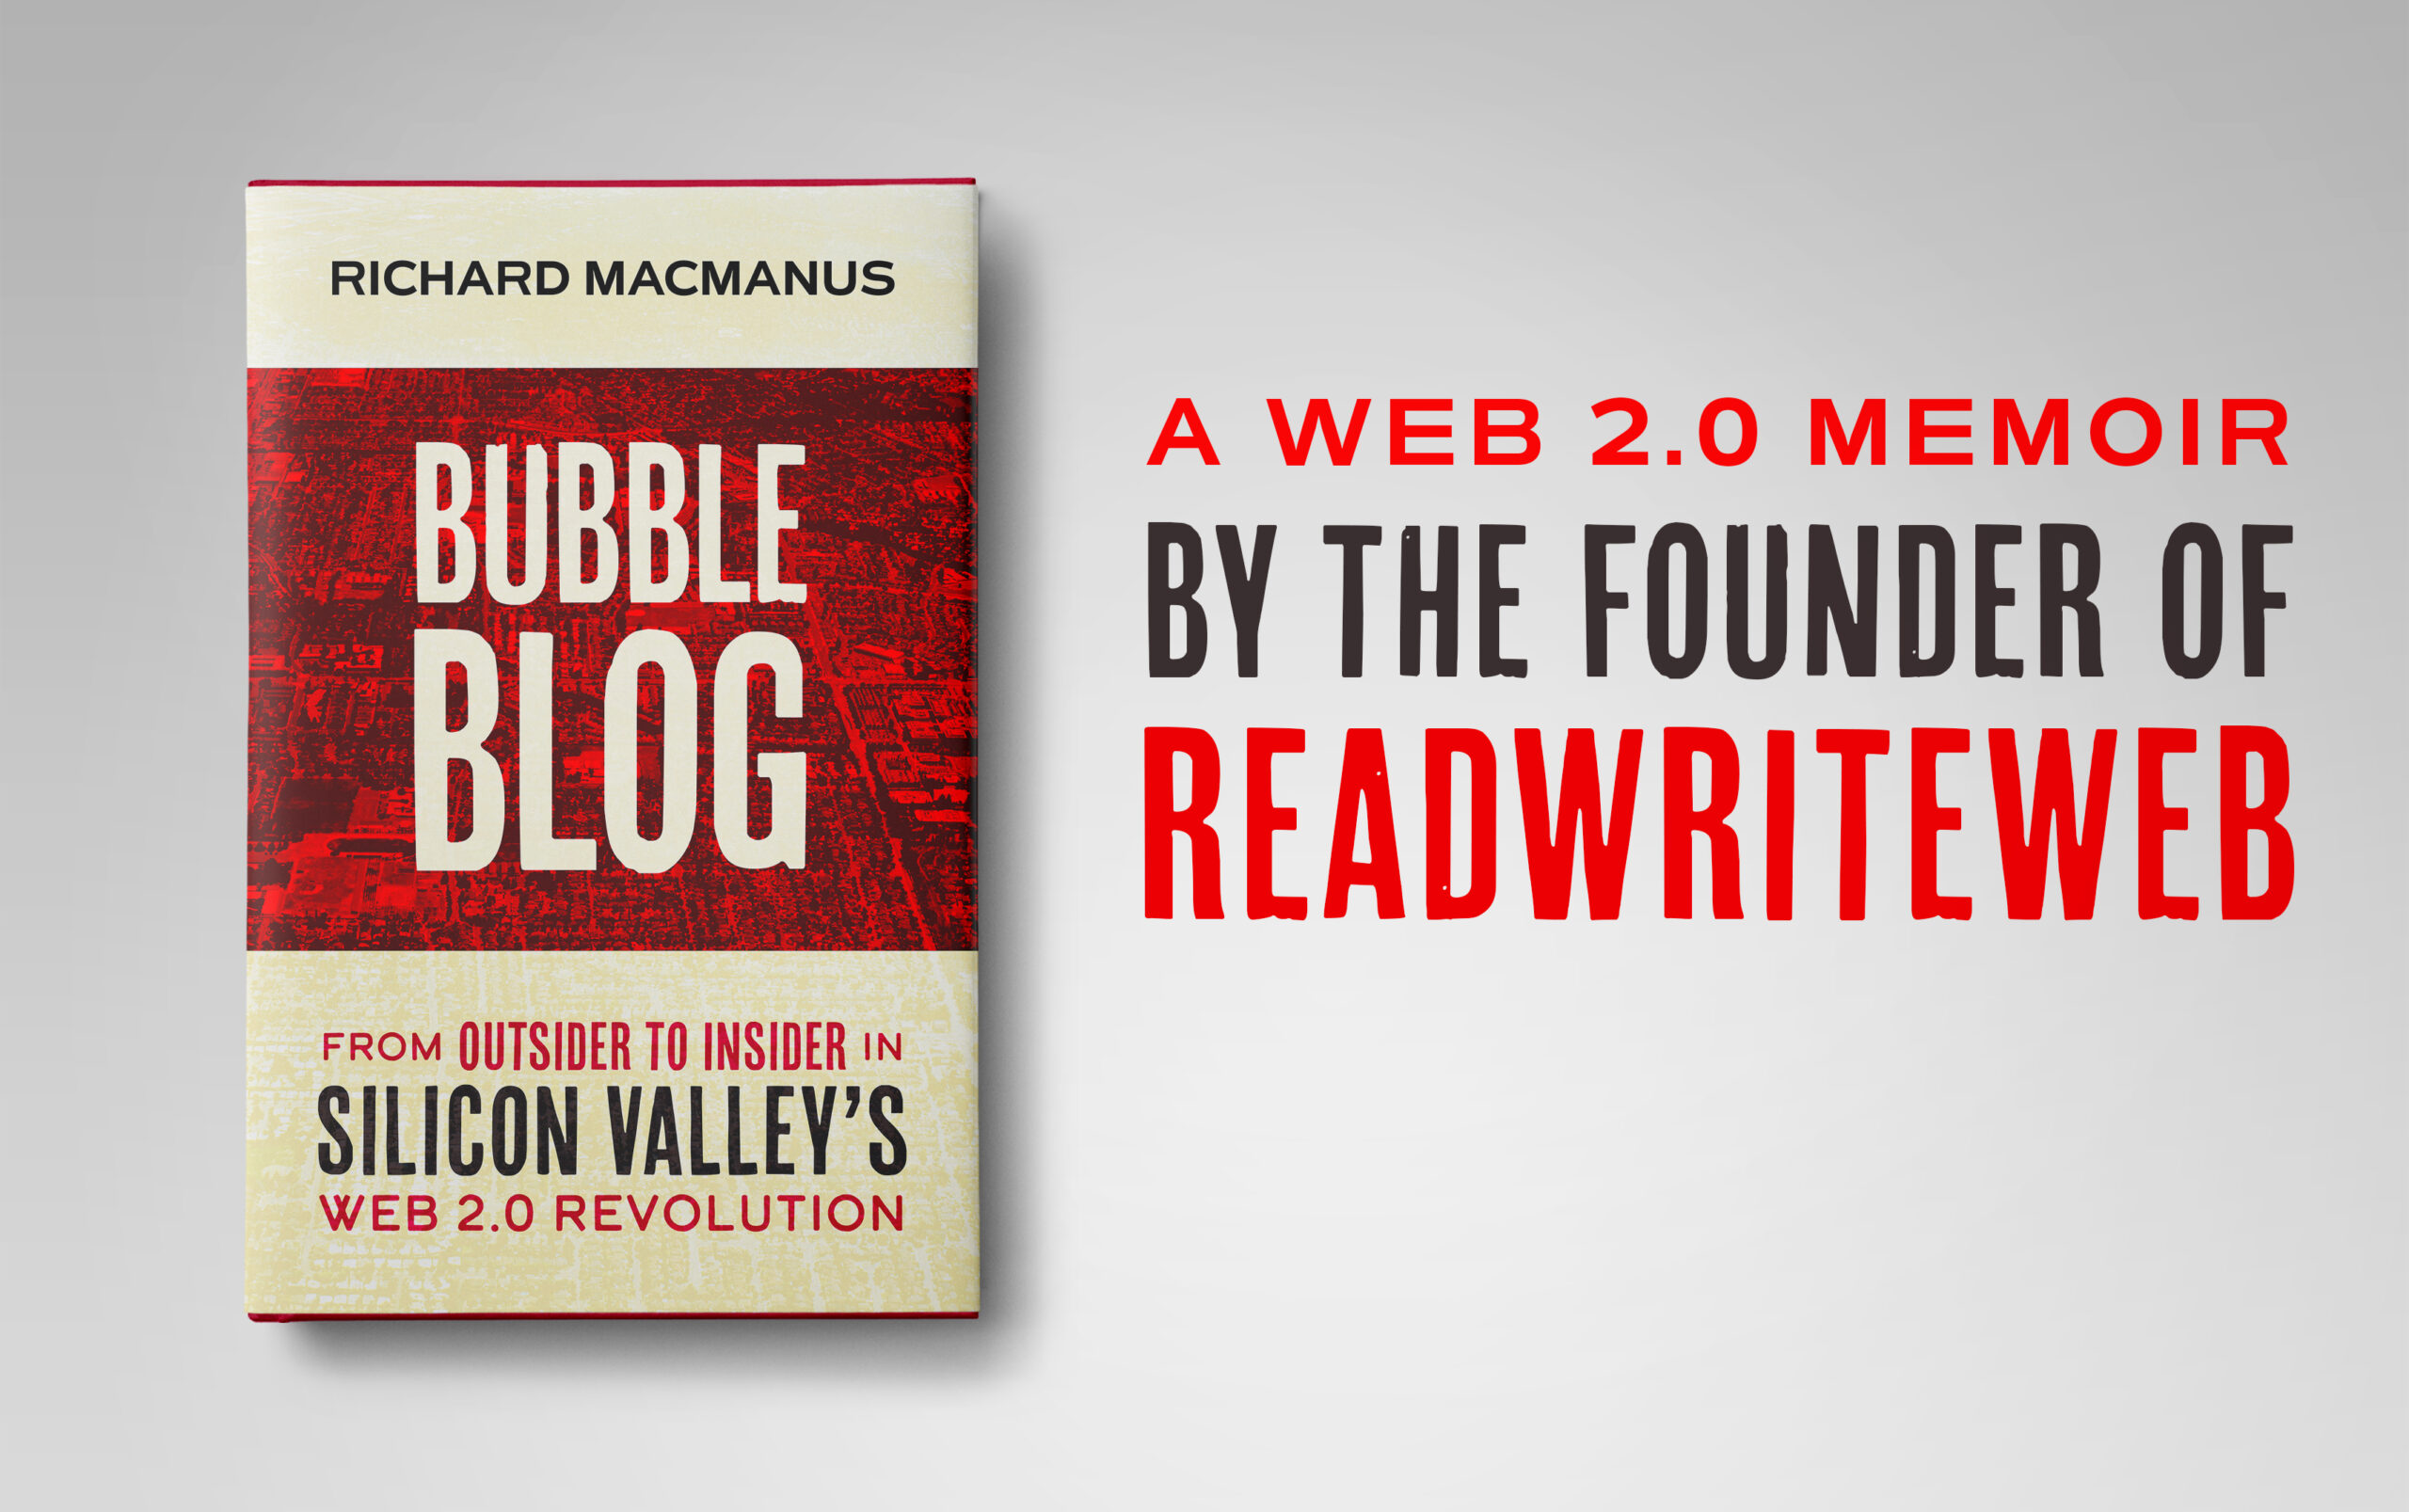 Bubble Blog: From Outsider to Insider in Silicon Valley’s Web 2.0 Revolution